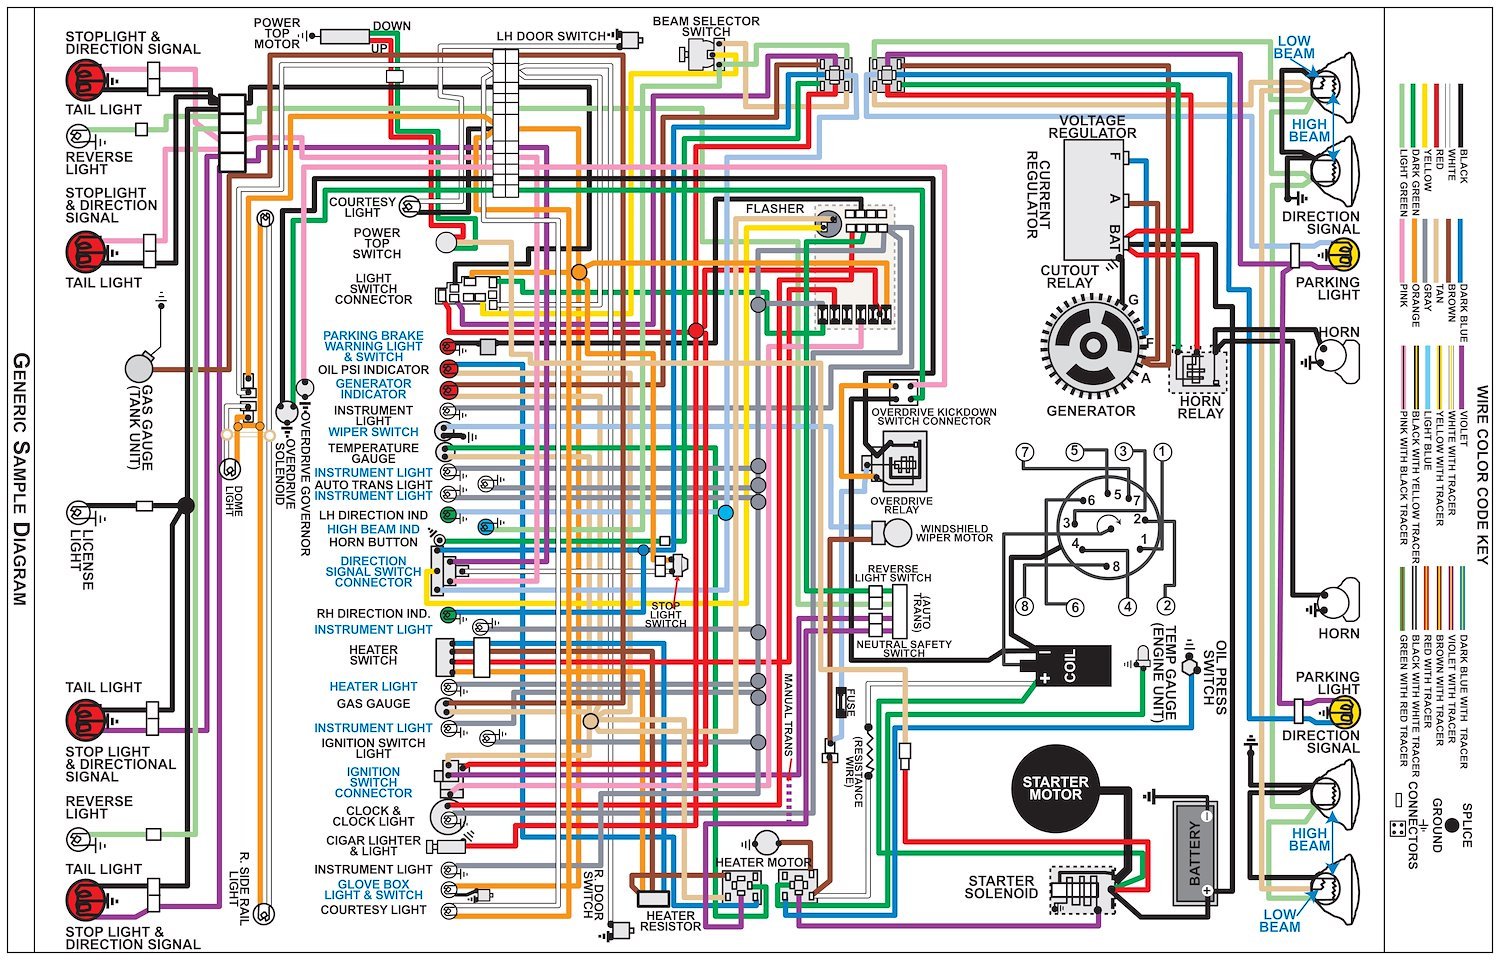 Wiring Diagram for 1974 Ford F-Series Truck, 11 in x 17 in., Laminated